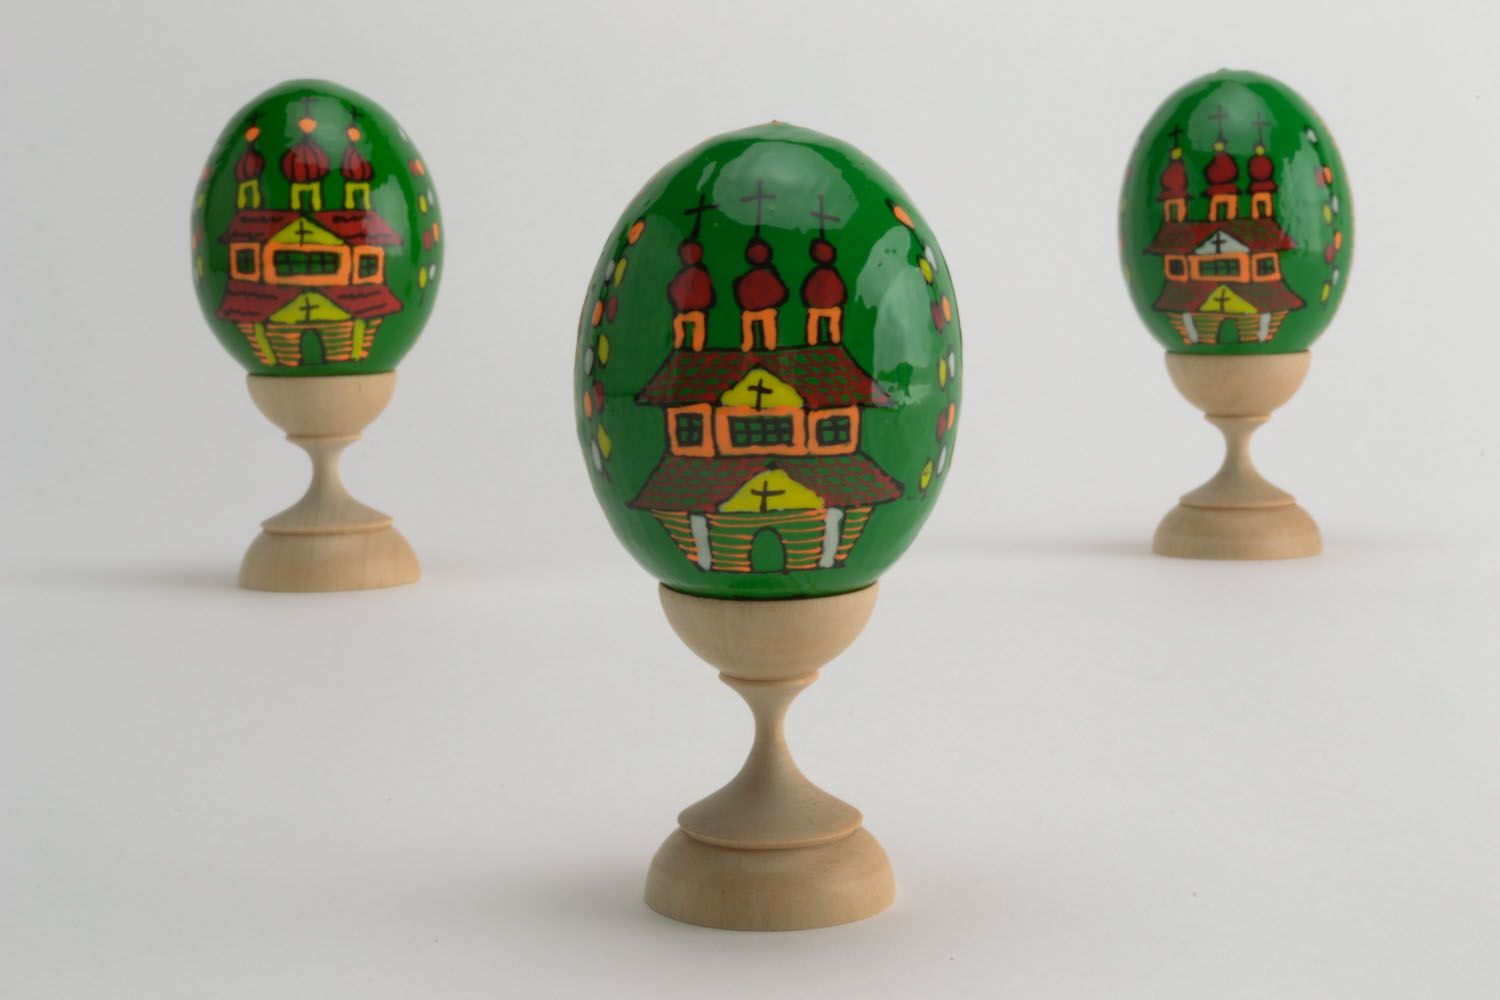 Wooden egg painted with enamel photo 1